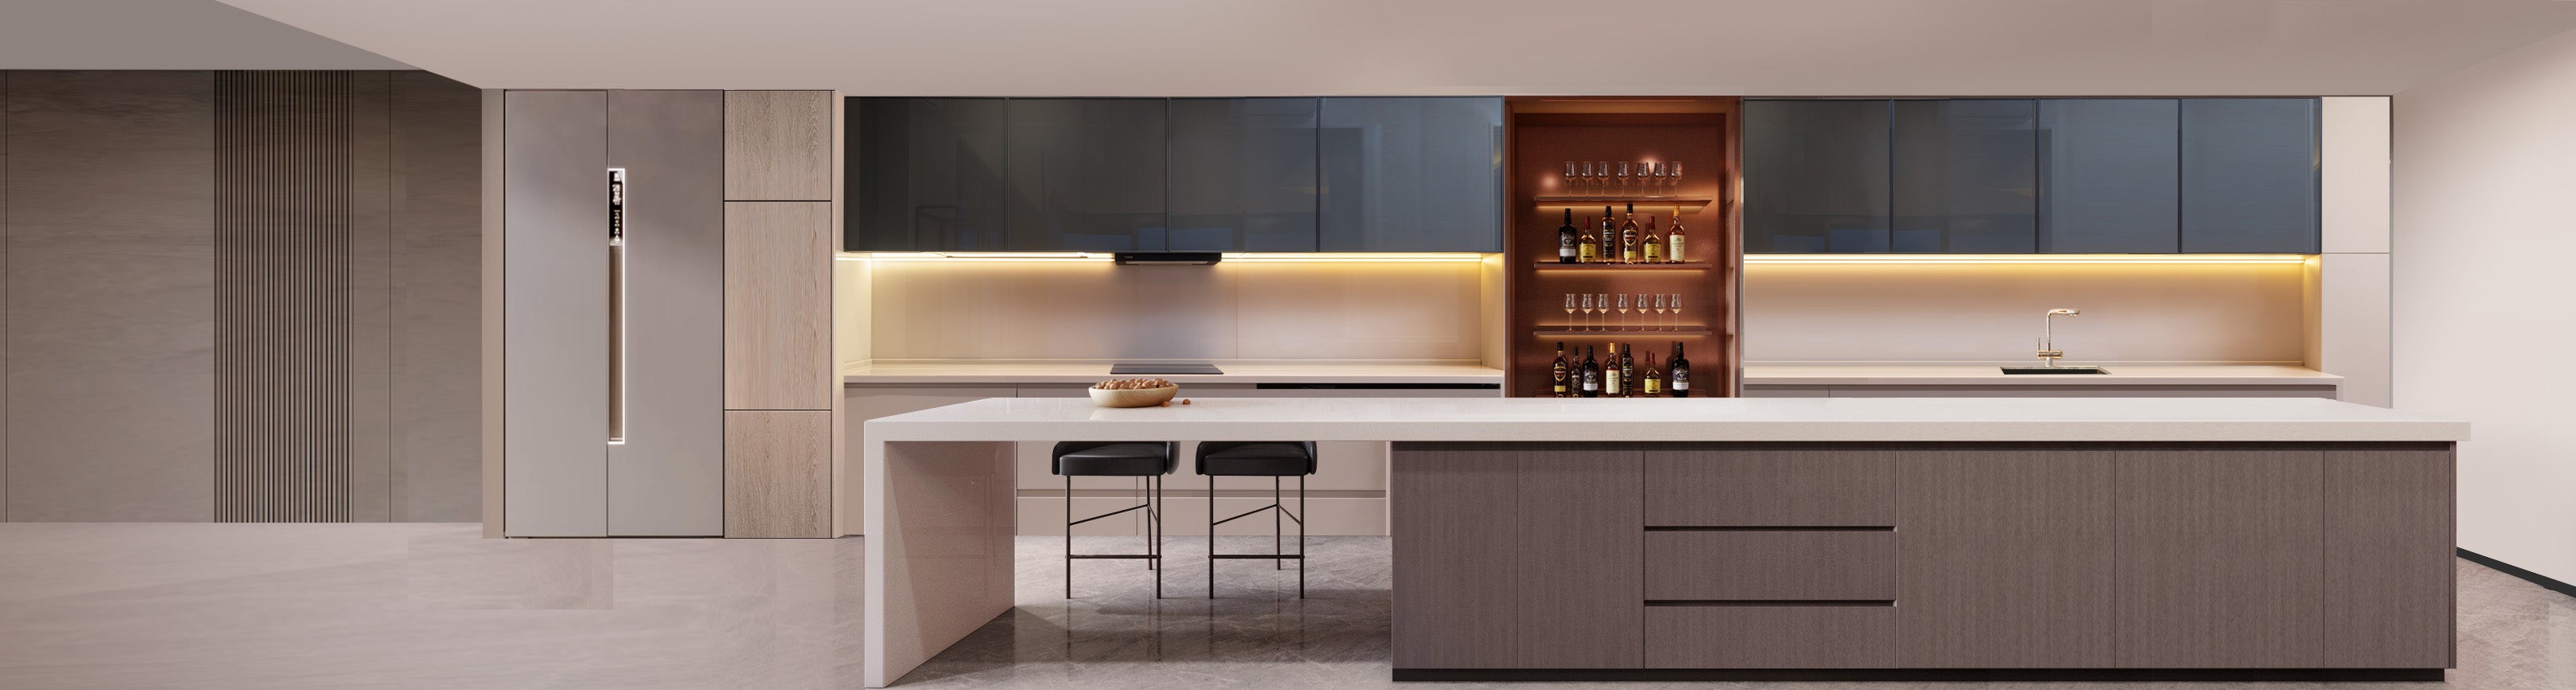 Elegant modern kitchen design featuring under-cabinet LED lighting that casts a warm ambiance over the clean lines of dark wood cabinetry and a white countertop. A built-in illuminated shelving unit showcases a selection of bottles and glassware, complemented by high-end appliances and minimalist bar stools.